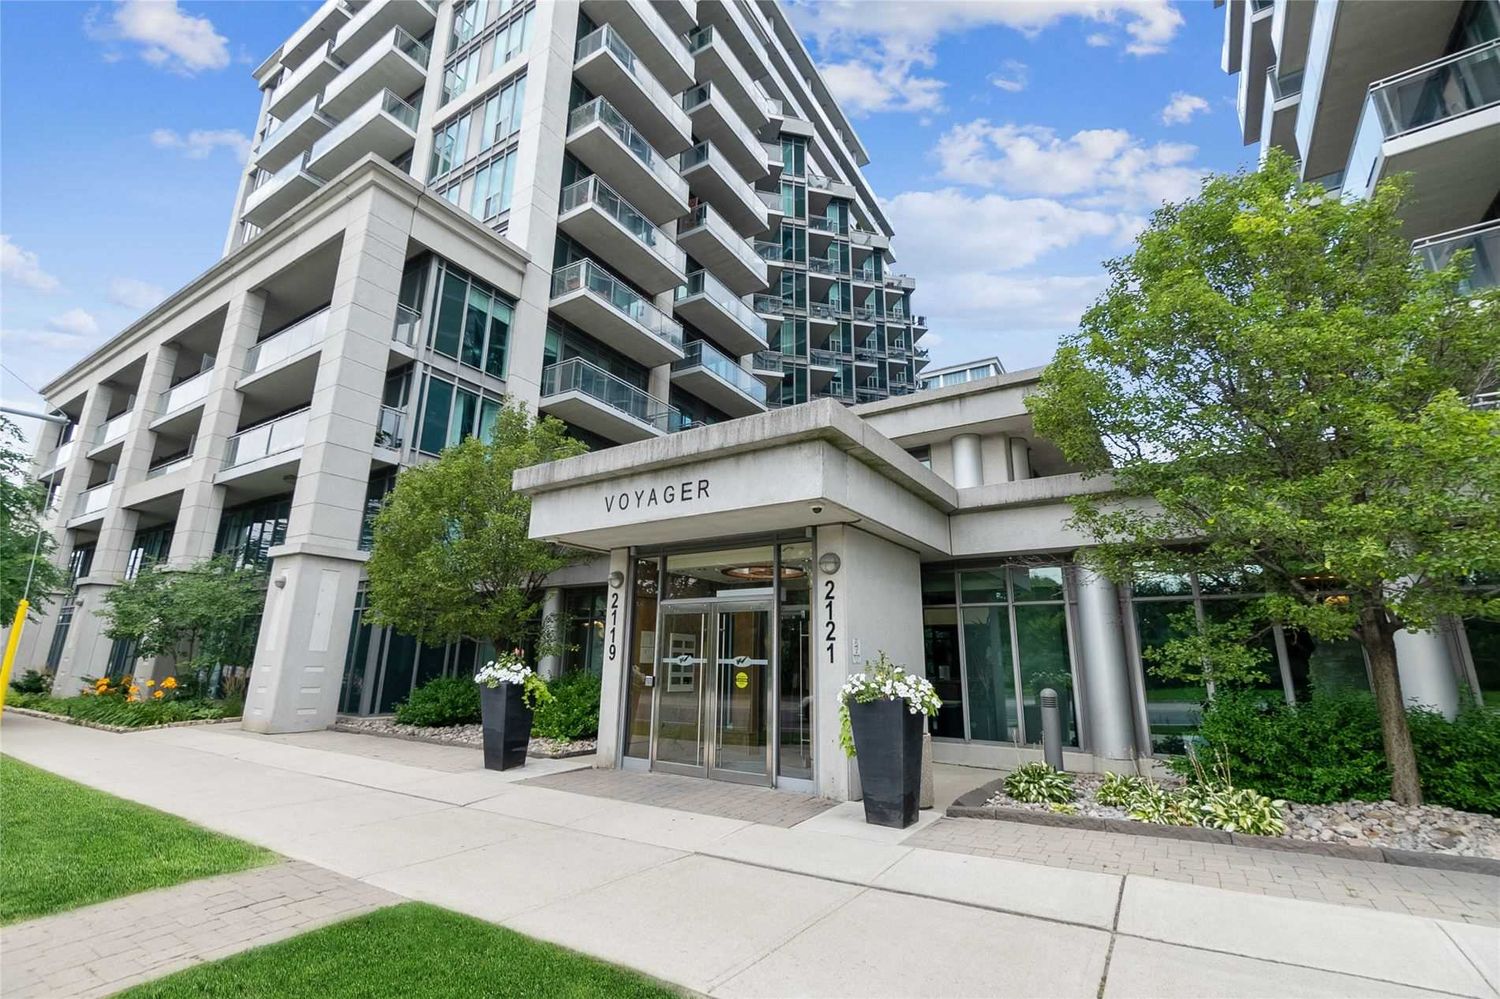 2121 Lake Shore Blvd W. This condo at Voyager I at Waterview Condos is located in  Etobicoke, Toronto - image #2 of 2 by Strata.ca